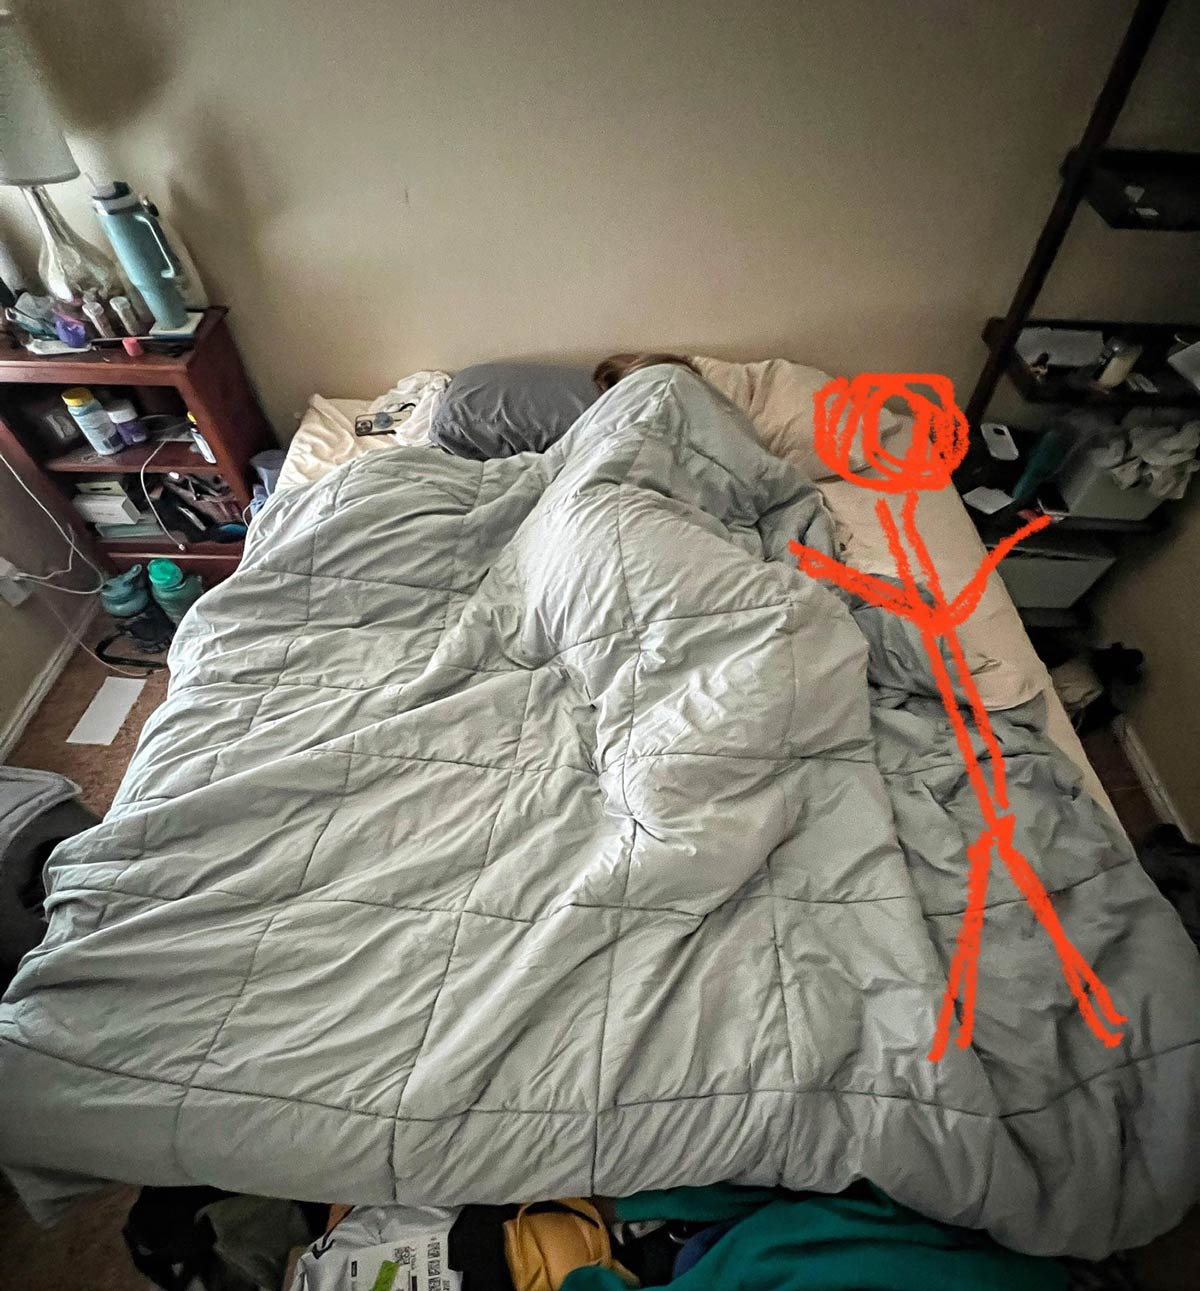 Artist rendering of how much space my wife leaves me in bed. Approx 5000 square inches of a possible 6080. She's the Ghengis Khan of the king mattress